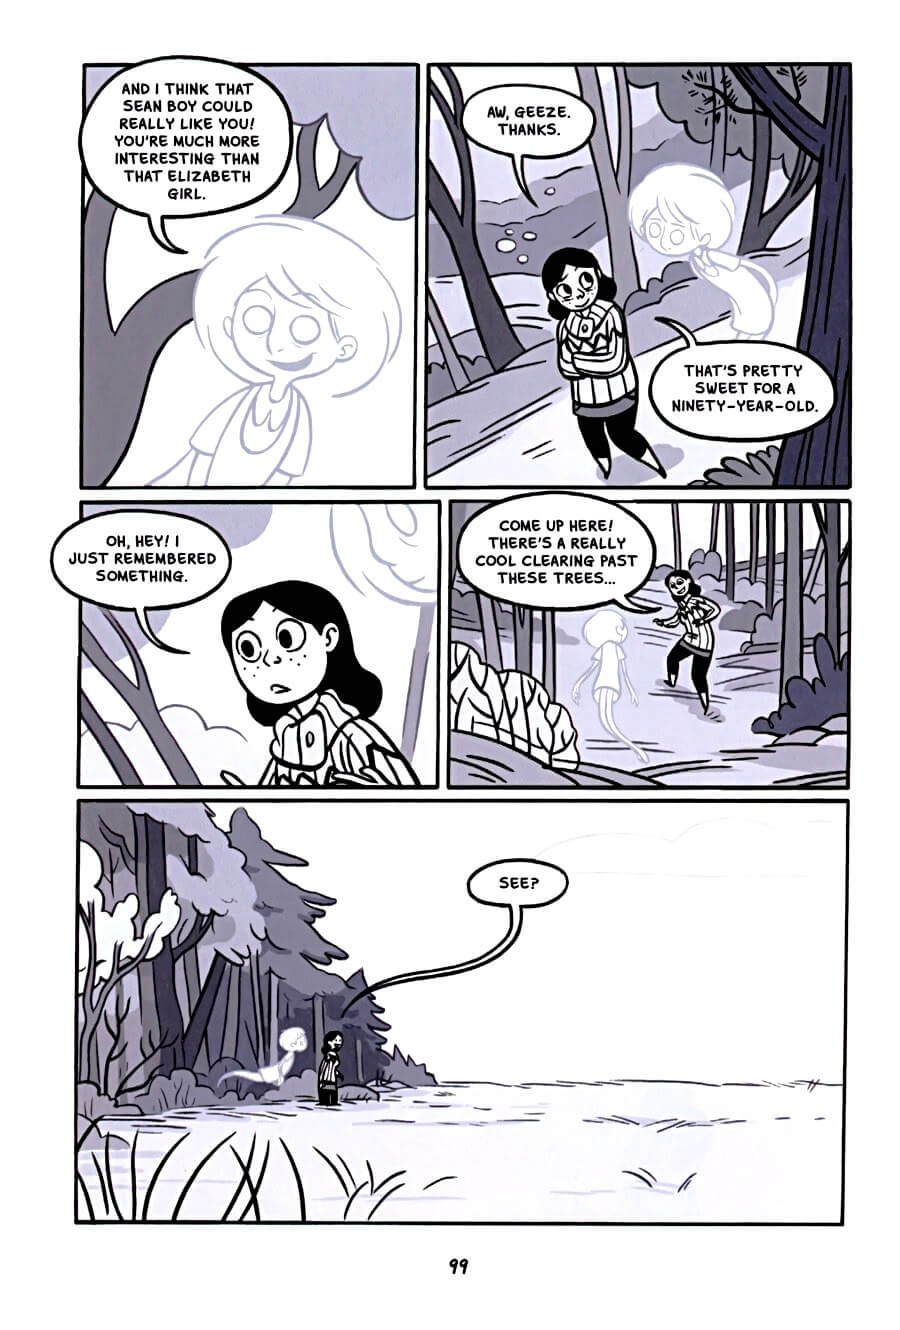 page 99 of anya's ghost graphic novel